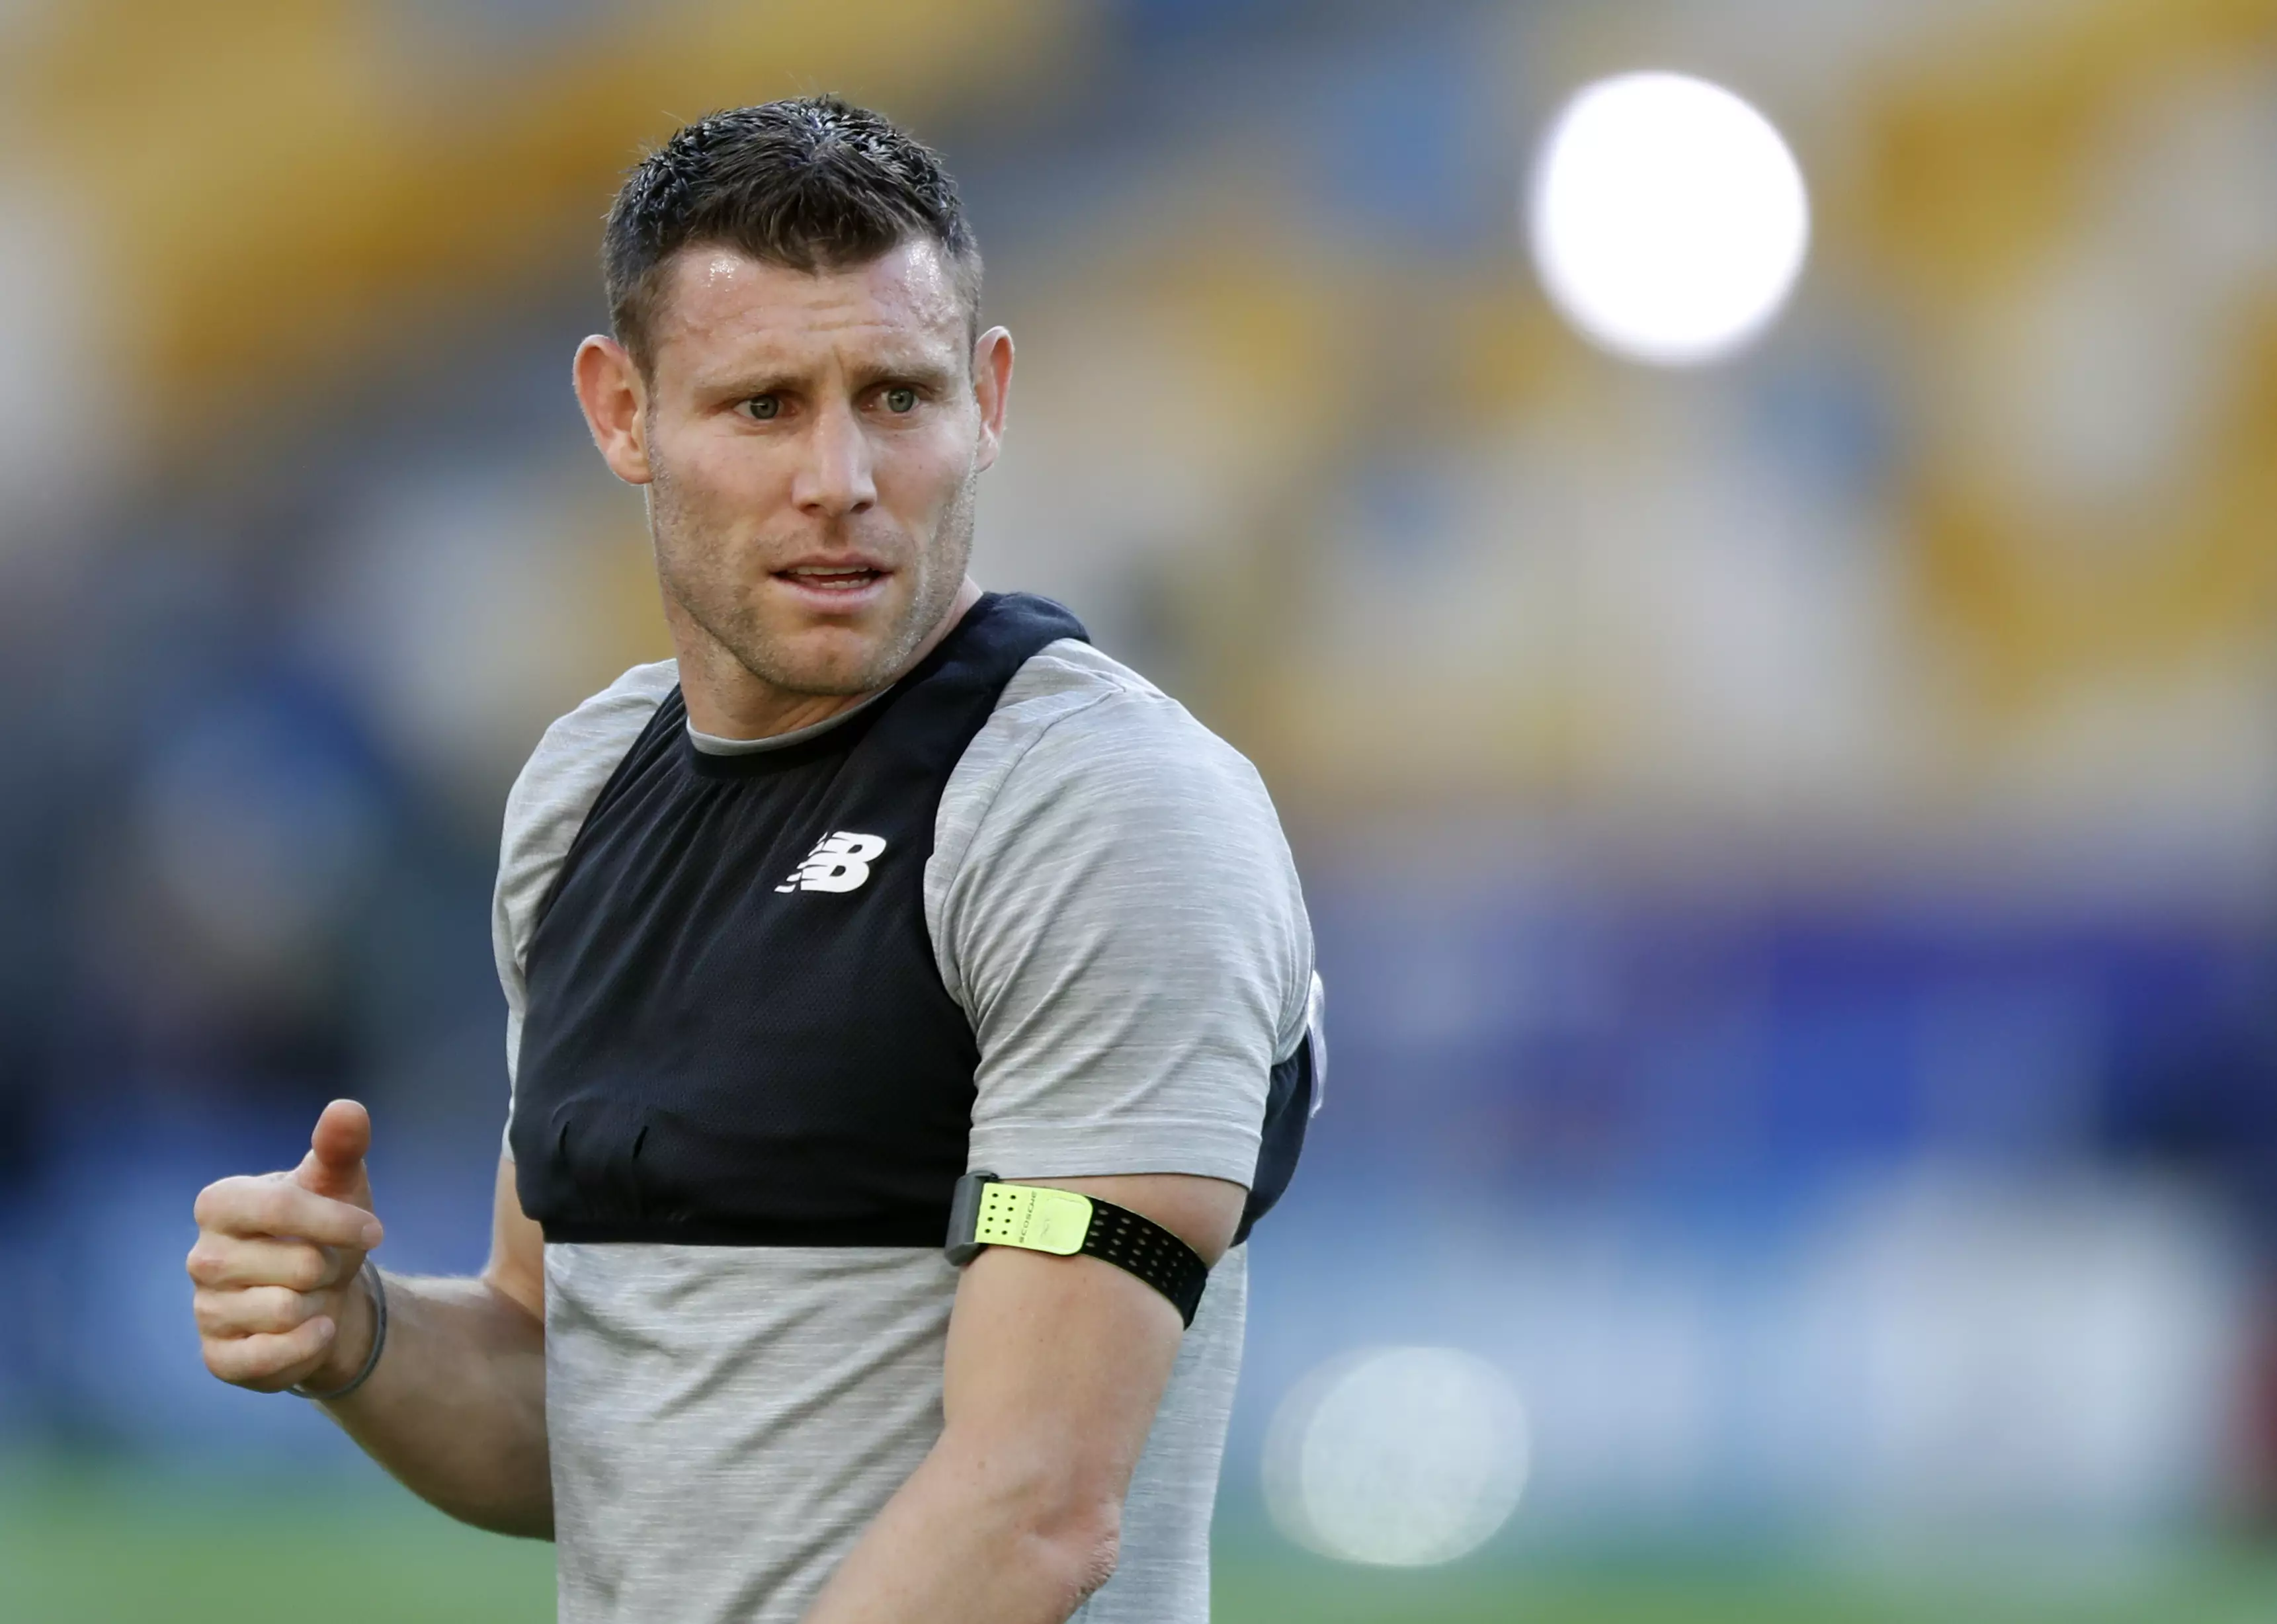 Milner during a training session. Image: PA